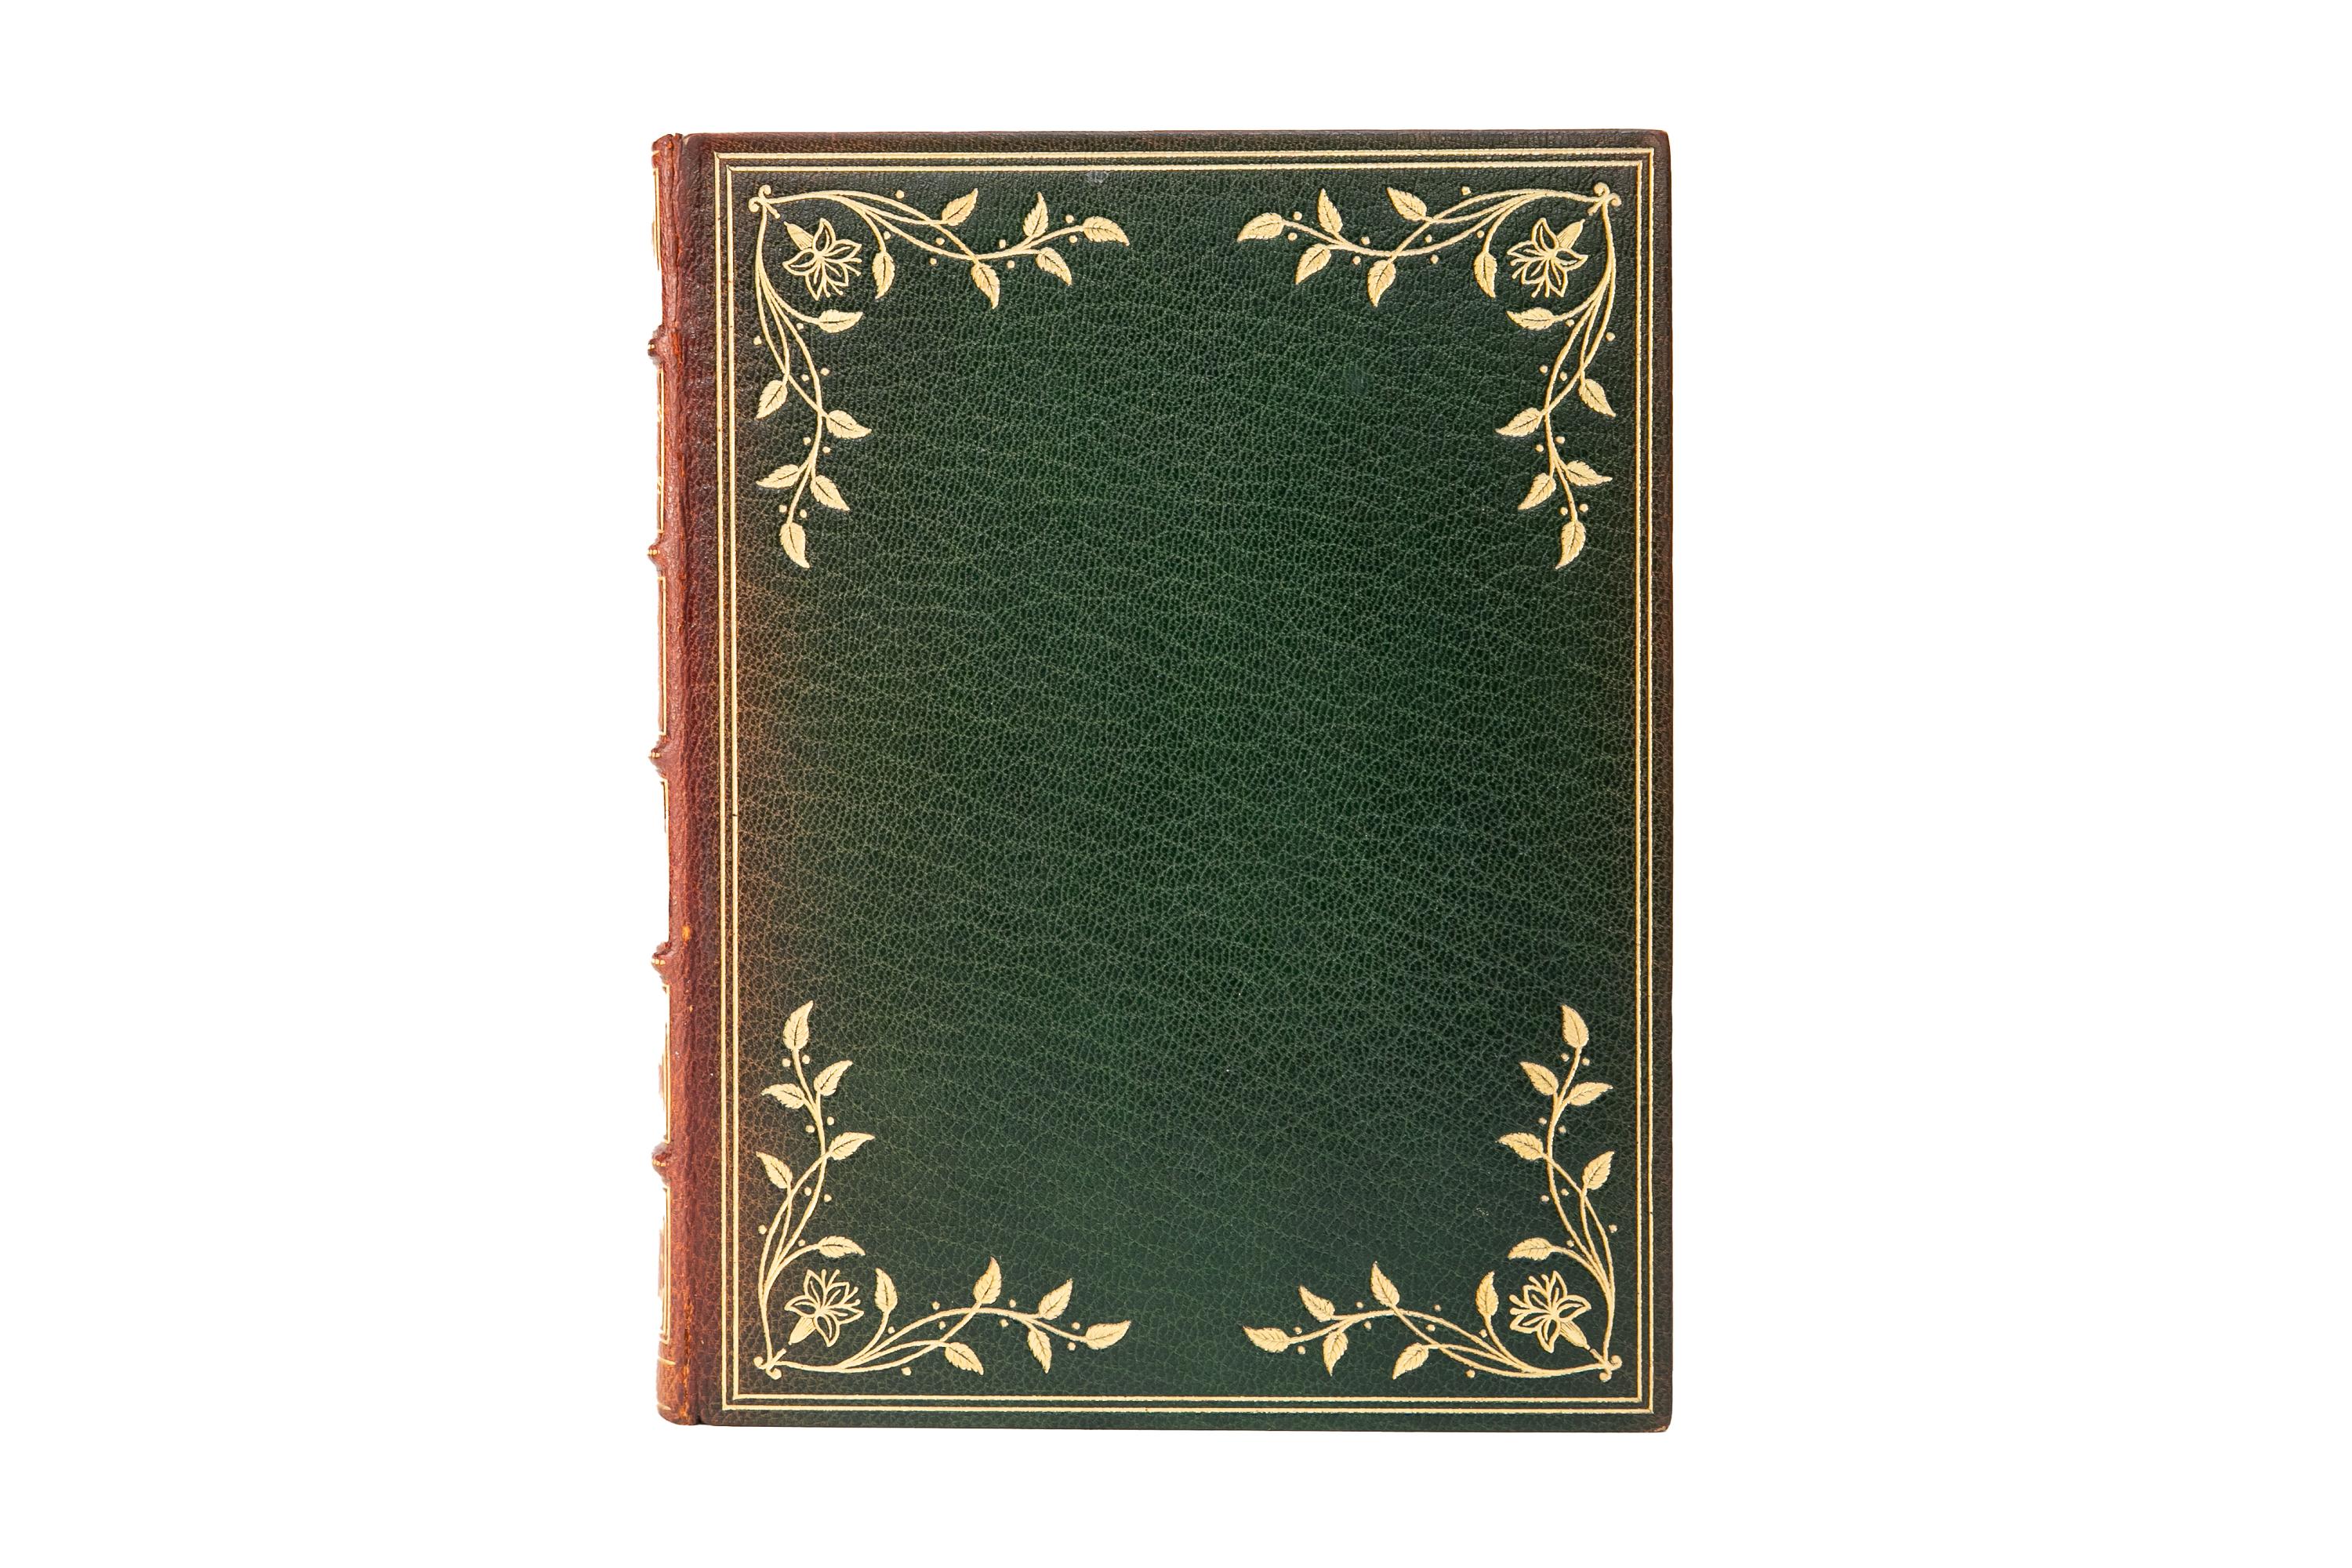 2 Volumes. John Keats, The Poems. Bound in full green morocco with the raised band spines faded to brown and decorated with floral gilt-tooled detailing. Top edges gilt with gilt-tooled dentelles and marbled endpapers. Arranged in chronological